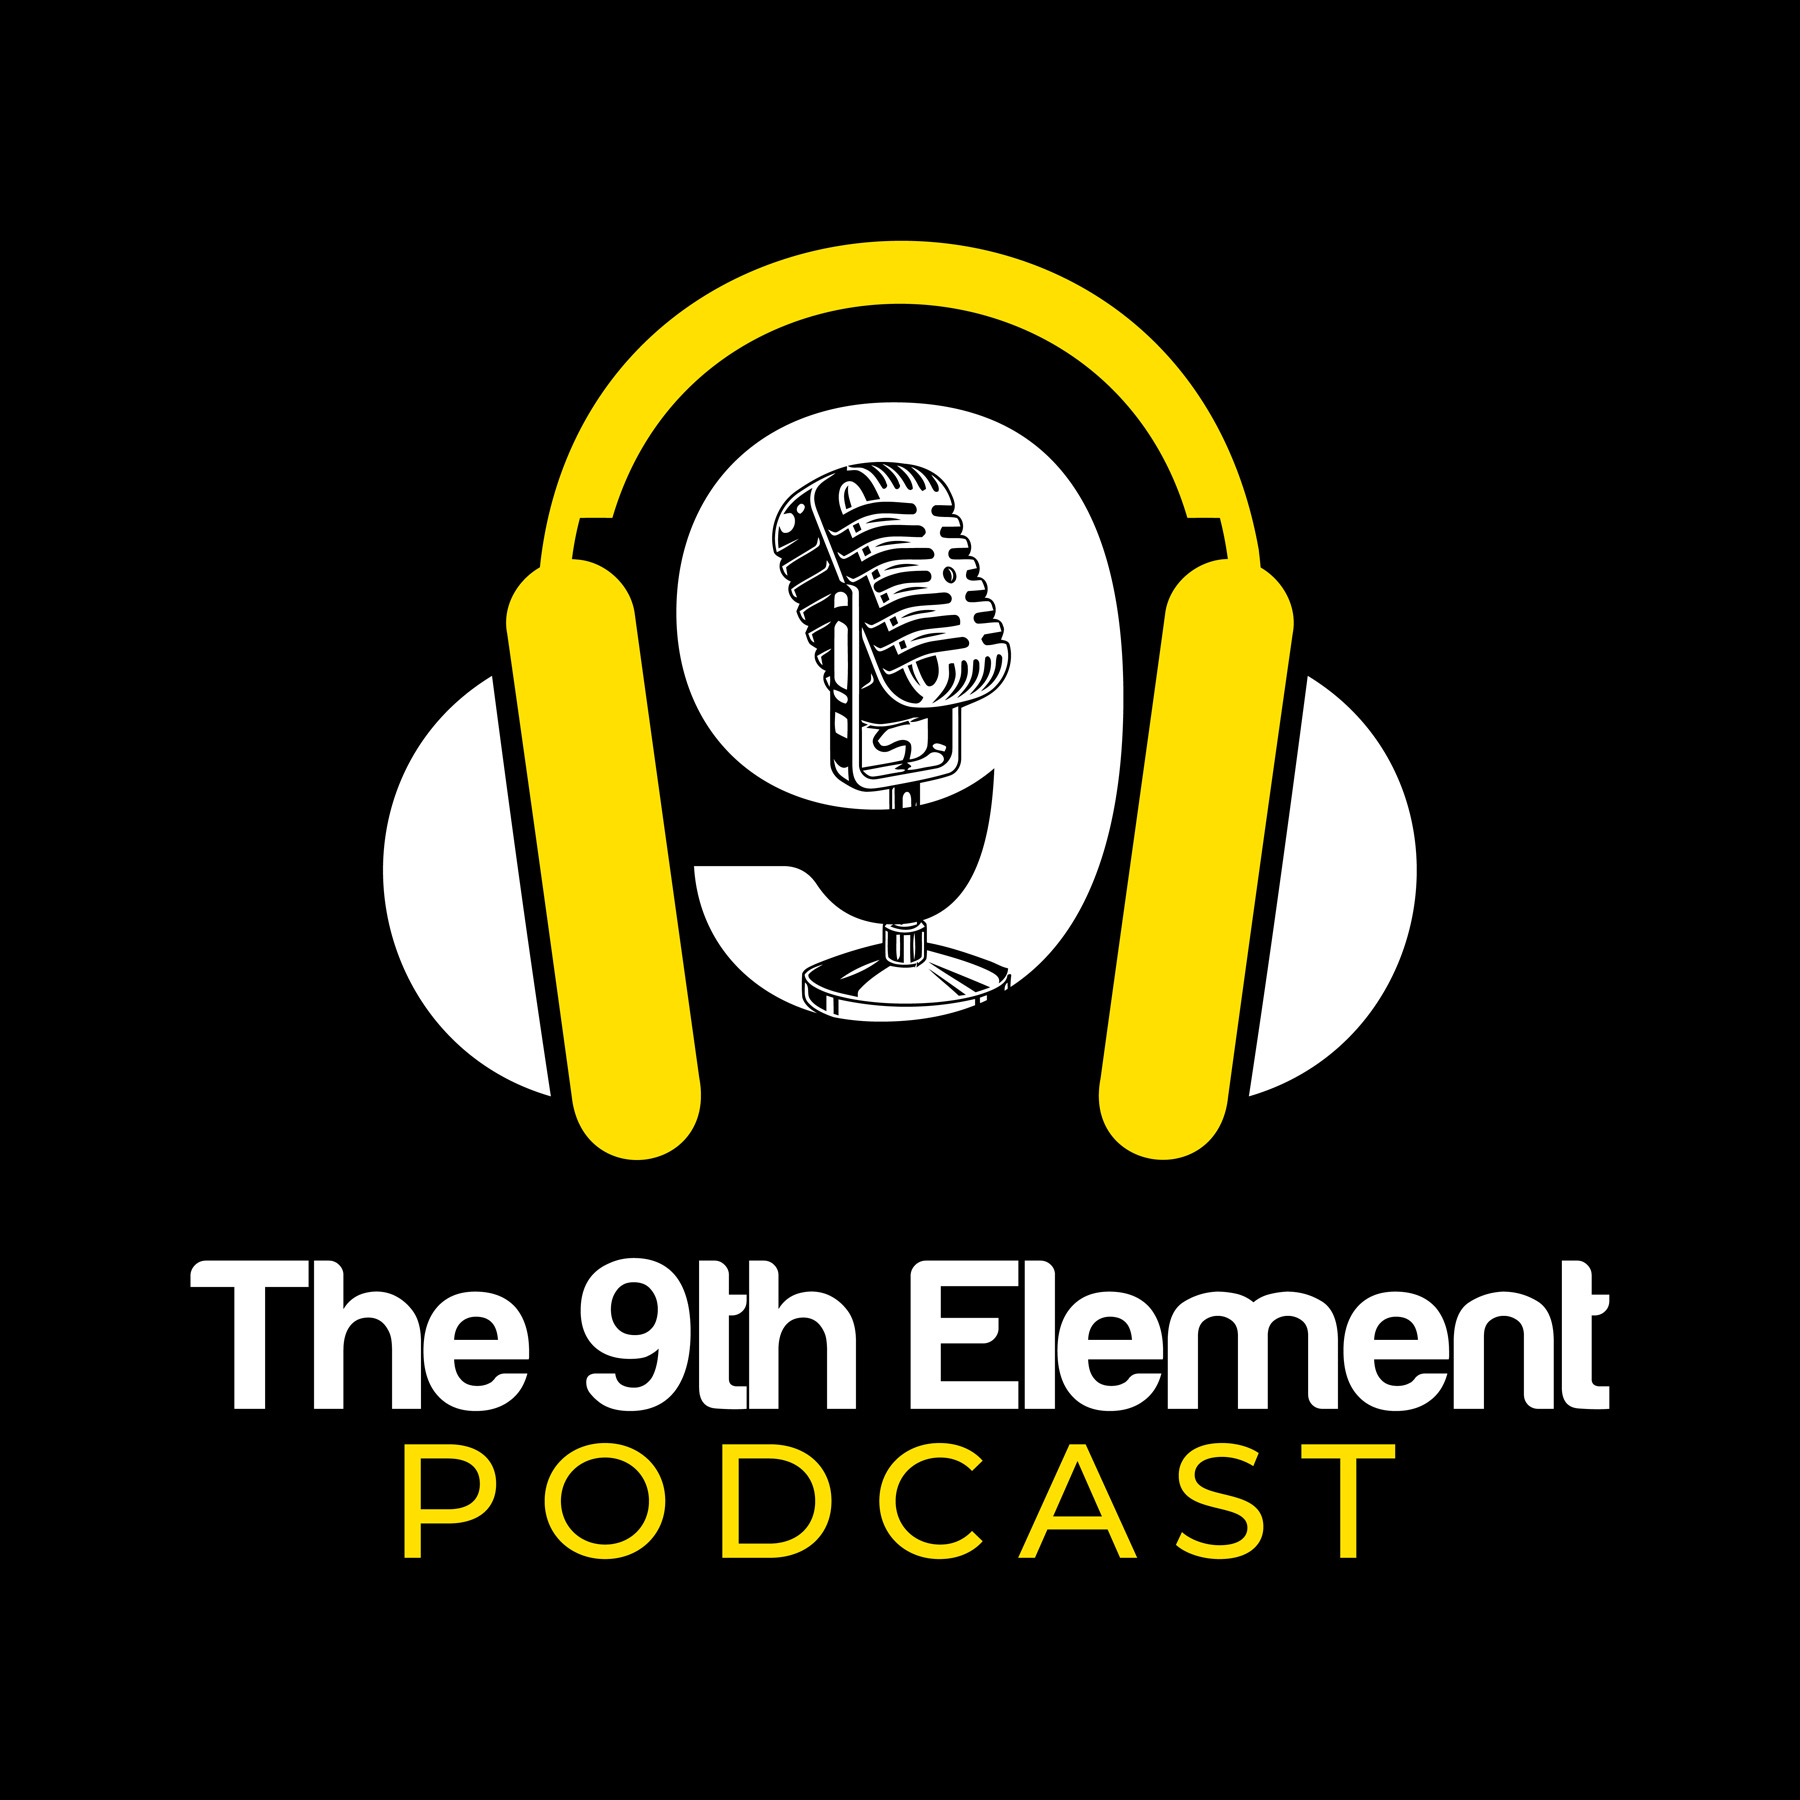 The 9th Element Podcast